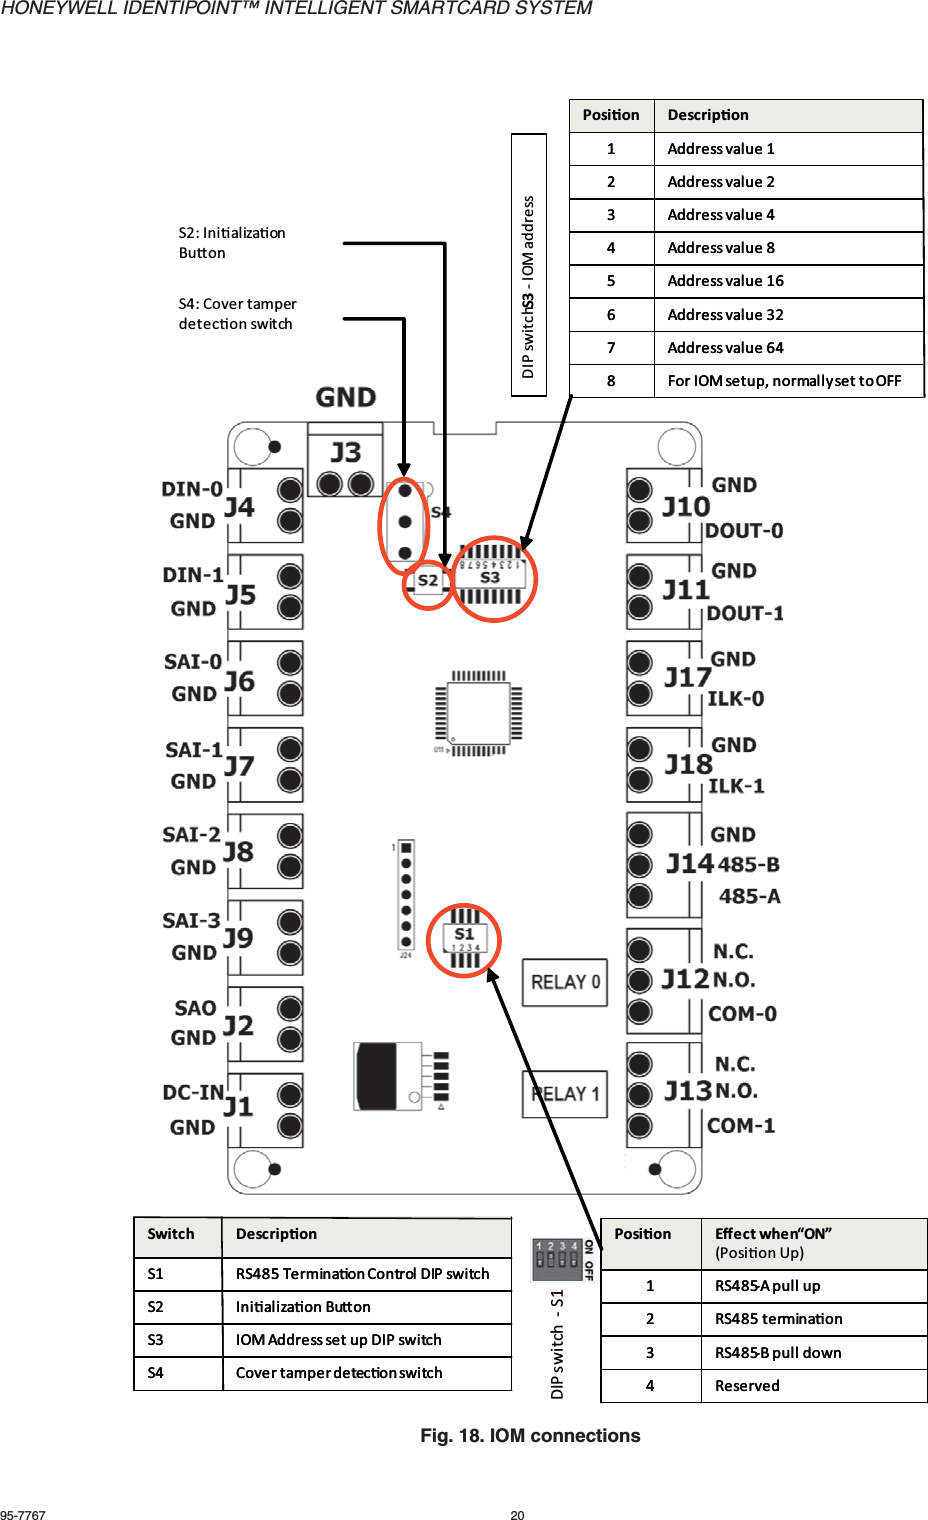 HONEYWELL IDENTIPOINT™ INTELLIGENT SMARTCARD SYSTEM95-7767 20Fig. 18. IOM connectionsDIP switch  -S1Posion Eﬀect when “ON”(Posion Up)1 RS485-A pull up2 RS485 terminaon3 RS485-B pull down4ReservedPosion Eﬀect when “ON”(Posion Up)1 RS485-A pull up2 RS485 terminaon3 RS485-B pull down4ReservedSwitch DescriponS1 RS485 Terminaon Control DIP switchS2 Inializaon BuonS3 IOM Address set up DIP switchS4 Cover tamper detecon switchSwitch DescriponS1 RS485 Terminaon Control DIP switchS2 Inializaon BuonS3 IOM Address set up DIP switchS4 Cover tamper detecon switchS2: Inializaon BuonDIP switch S3 -IOM addressPosion Descripon1 Address value 12 Address value 23 Address value 44 Address value 85 Address value 166 Address value 327 Address value 648 For IOM setup, normally set to OFFPosion Descripon1 Address value 12 Address value 23 Address value 44 Address value 85 Address value 166 Address value 327 Address value 648 For IOM setup, normally set to OFFS4: Cover tamper detecon switch